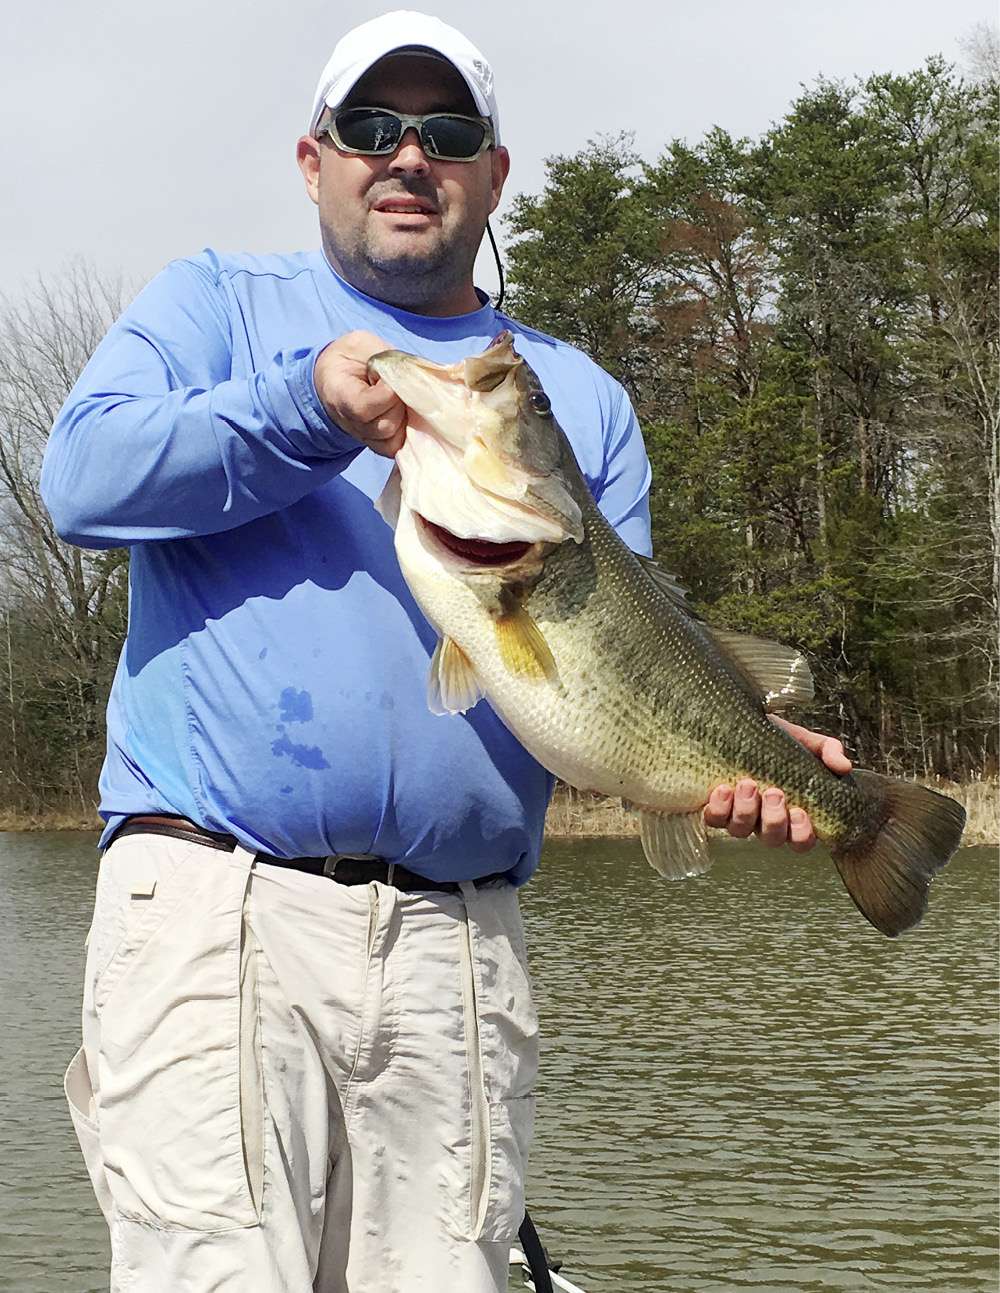 John James<br>
Virginia<br> 12-0<br> Sandy River, Virginia<br>
3/8-ounce homemade jig (crack craw) <br>
Water clarity: stained<br>
Depth: 4 feet<br>
Weather: clear